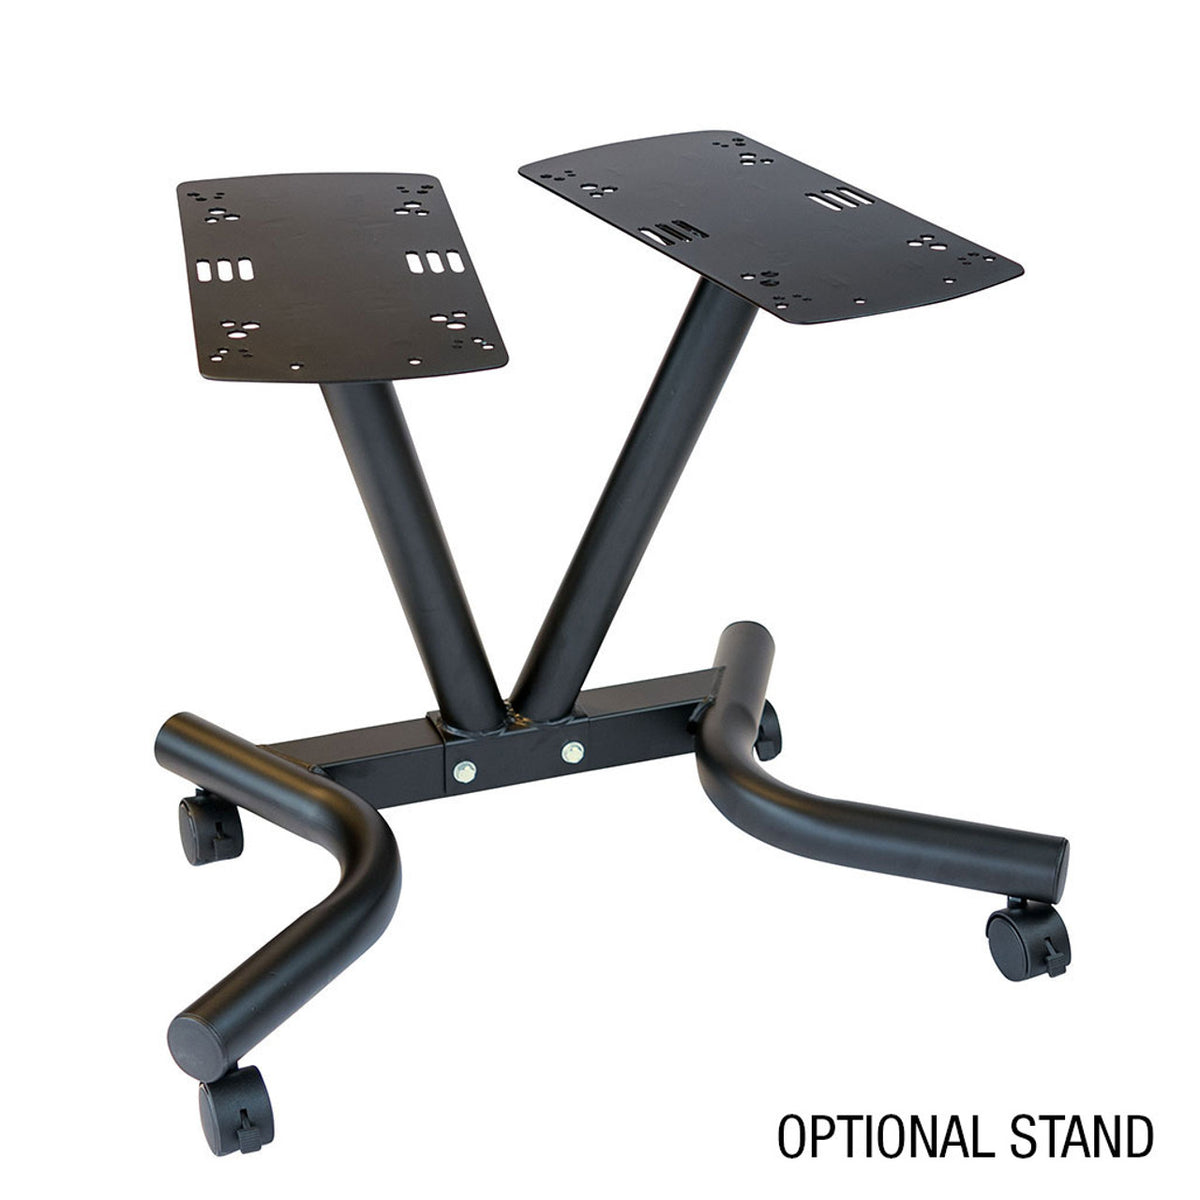 Adjustable Dumbbell Stand with Locking Caster Wheels